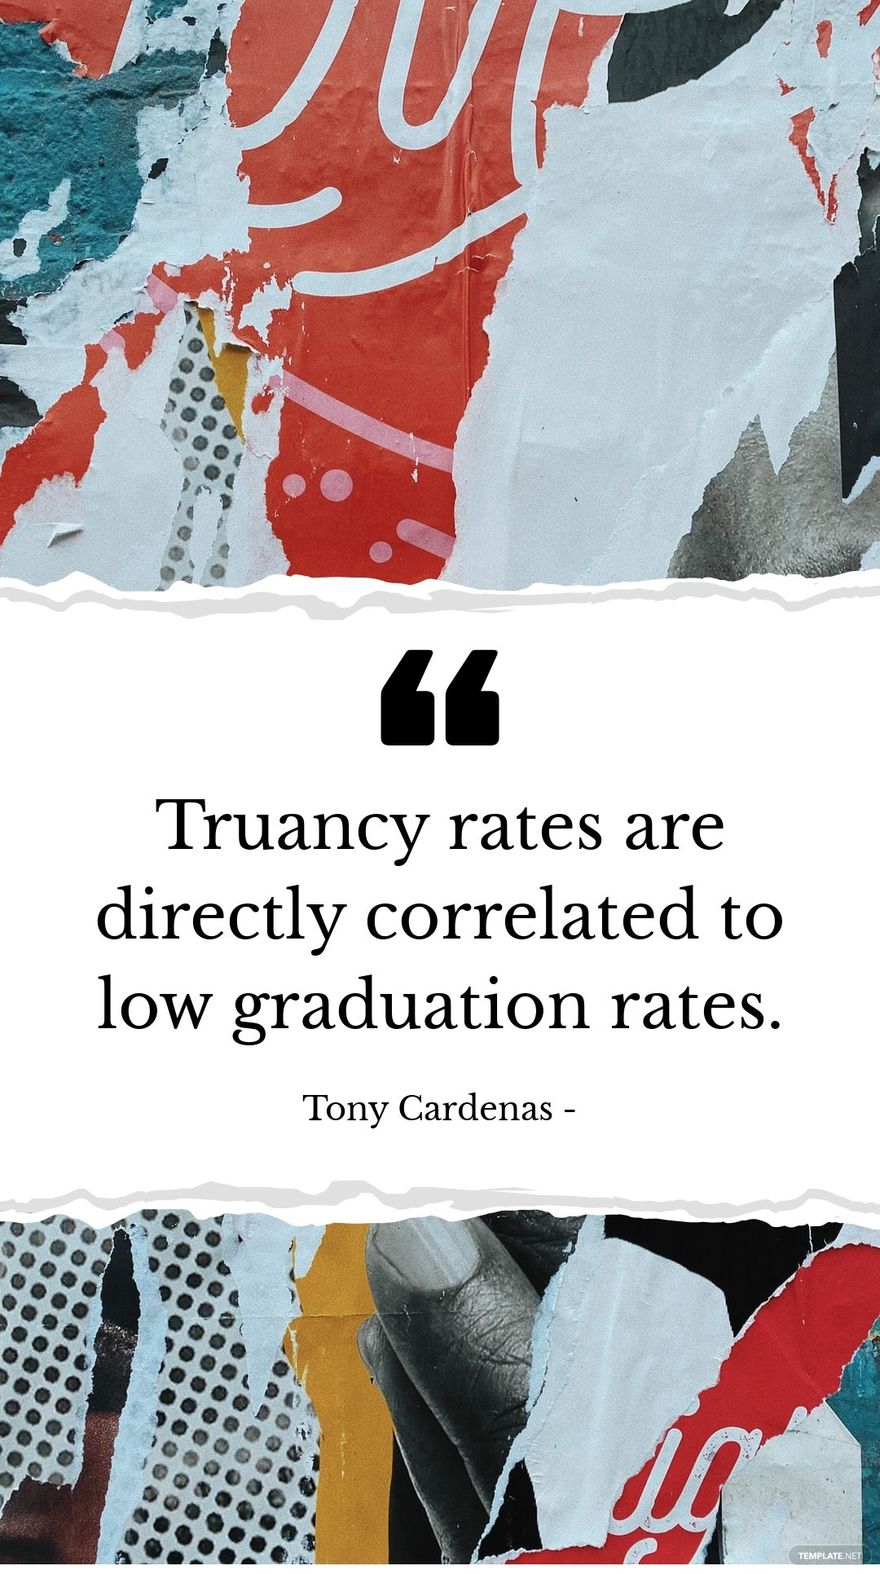 Tony Cardenas - Truancy rates are directly correlated to low graduation rates. in JPG